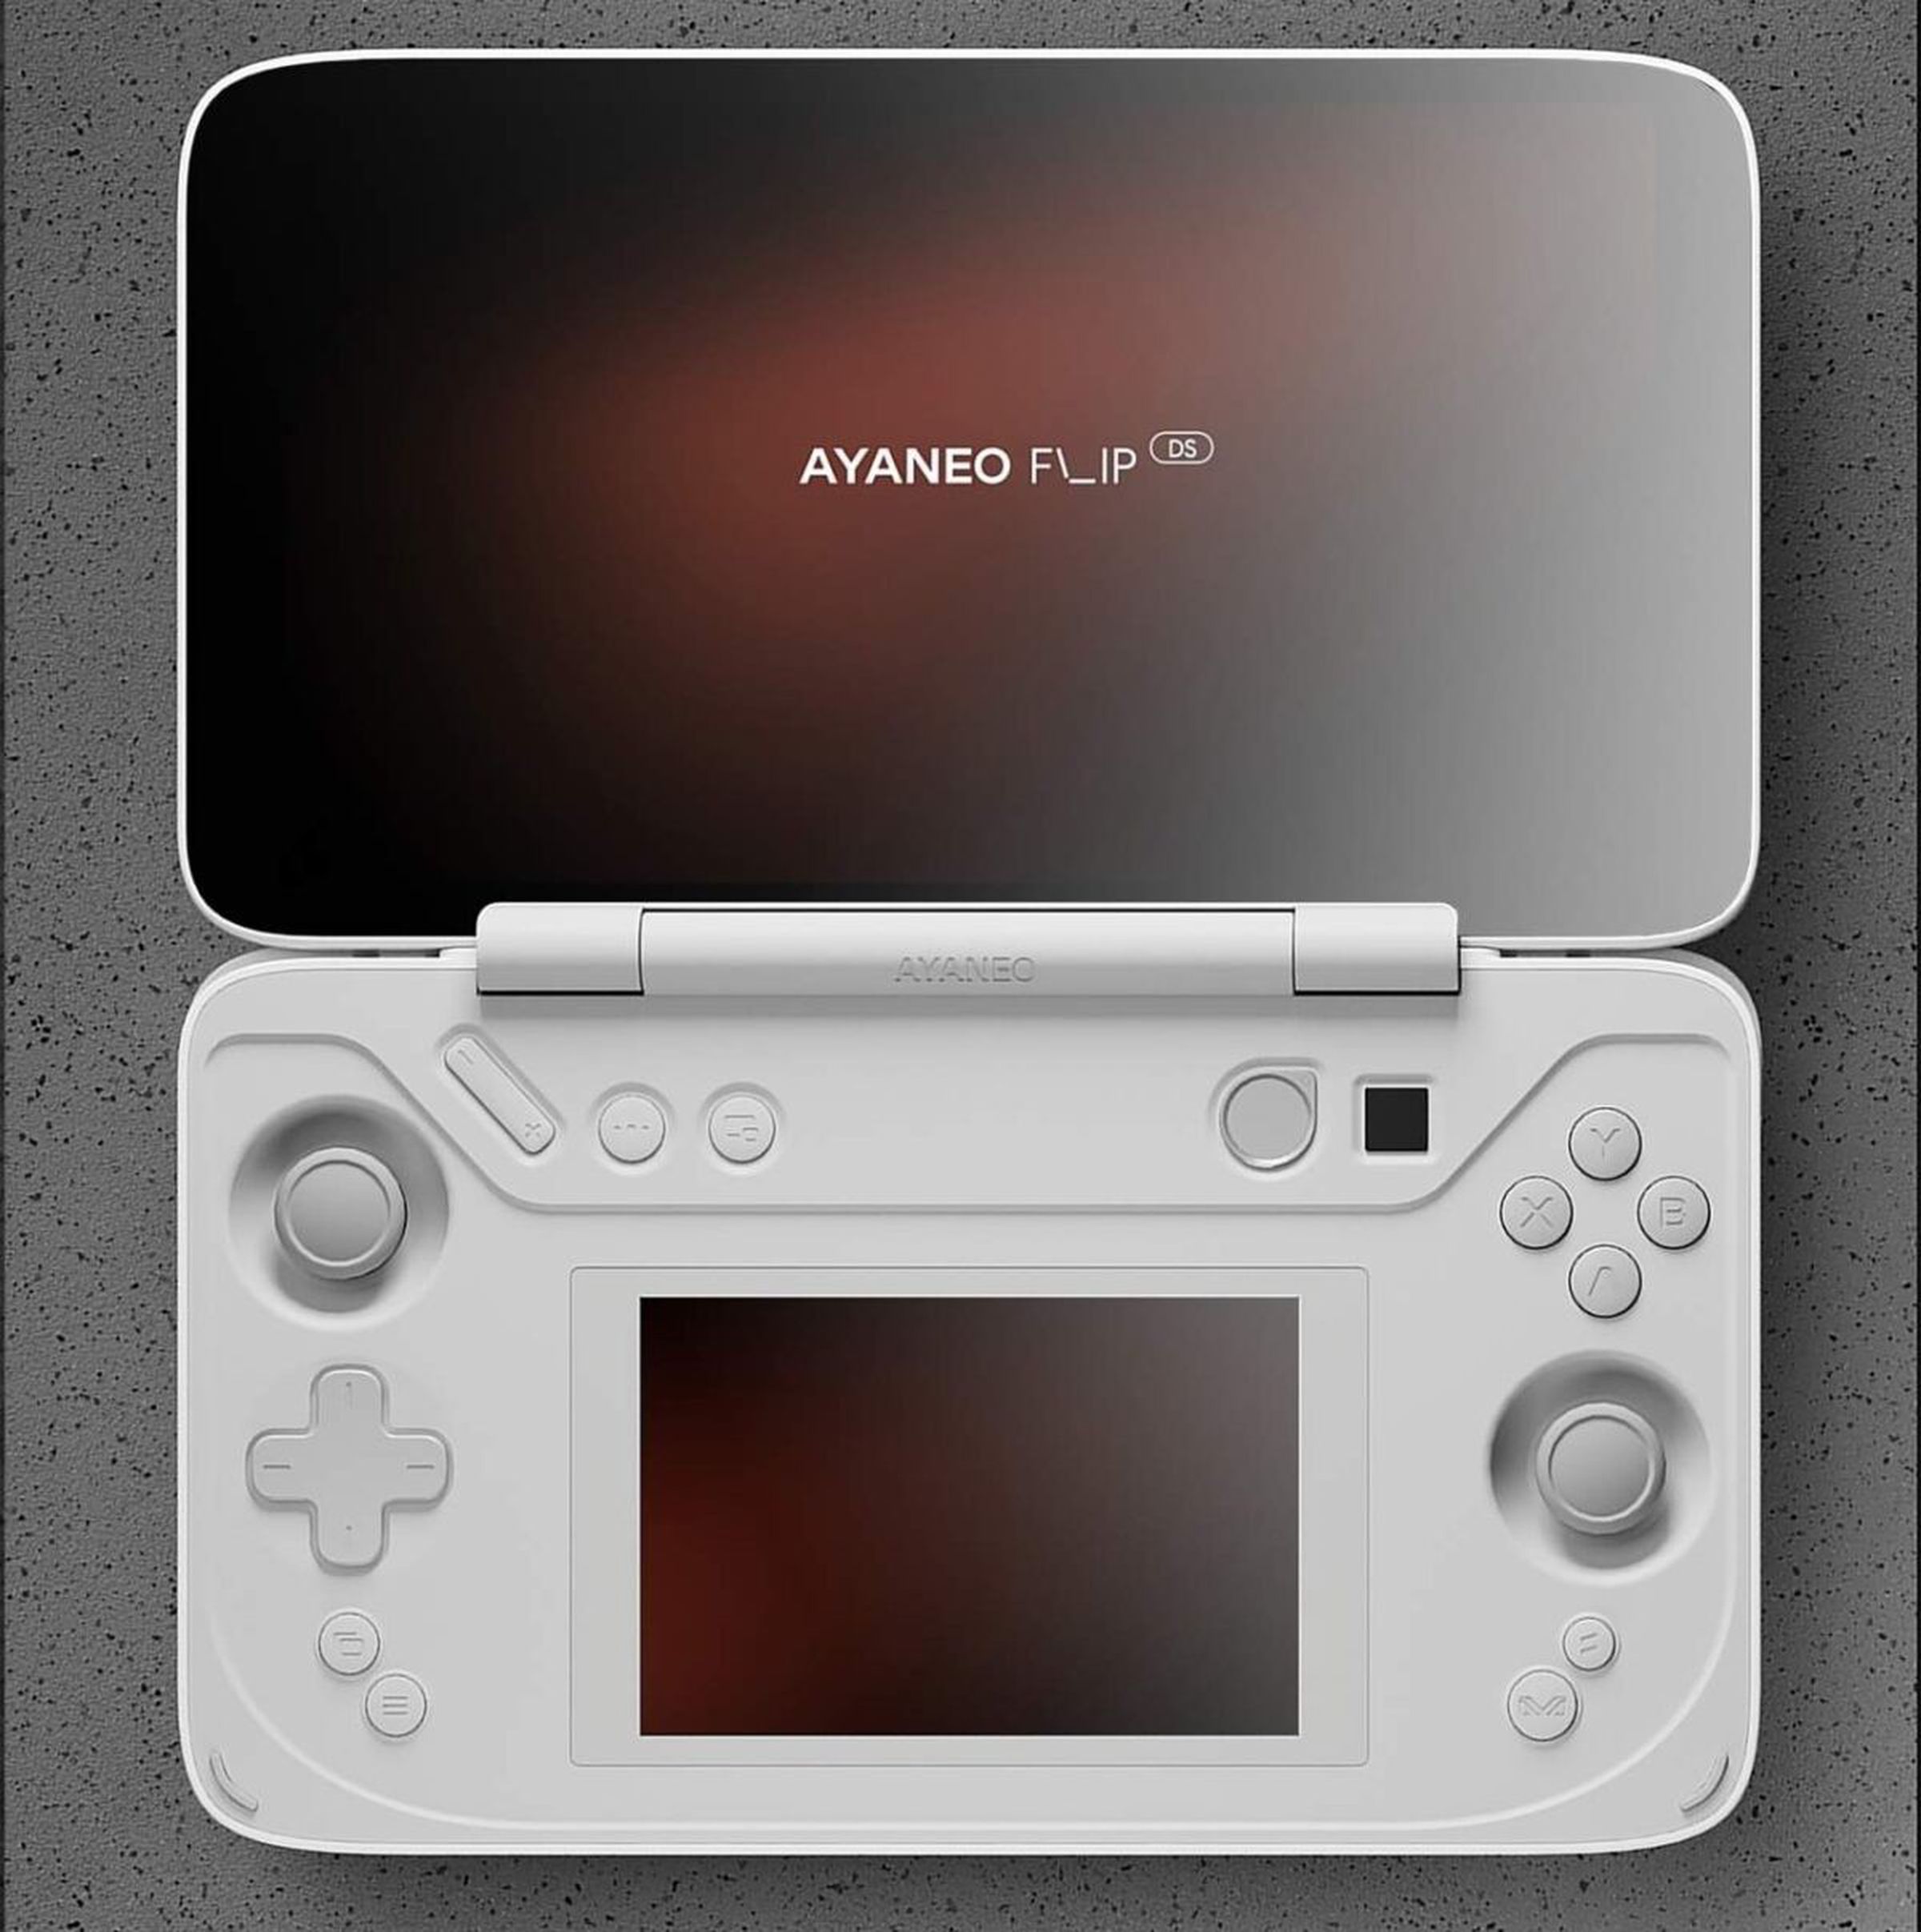 The Ayaneo Flip DS...